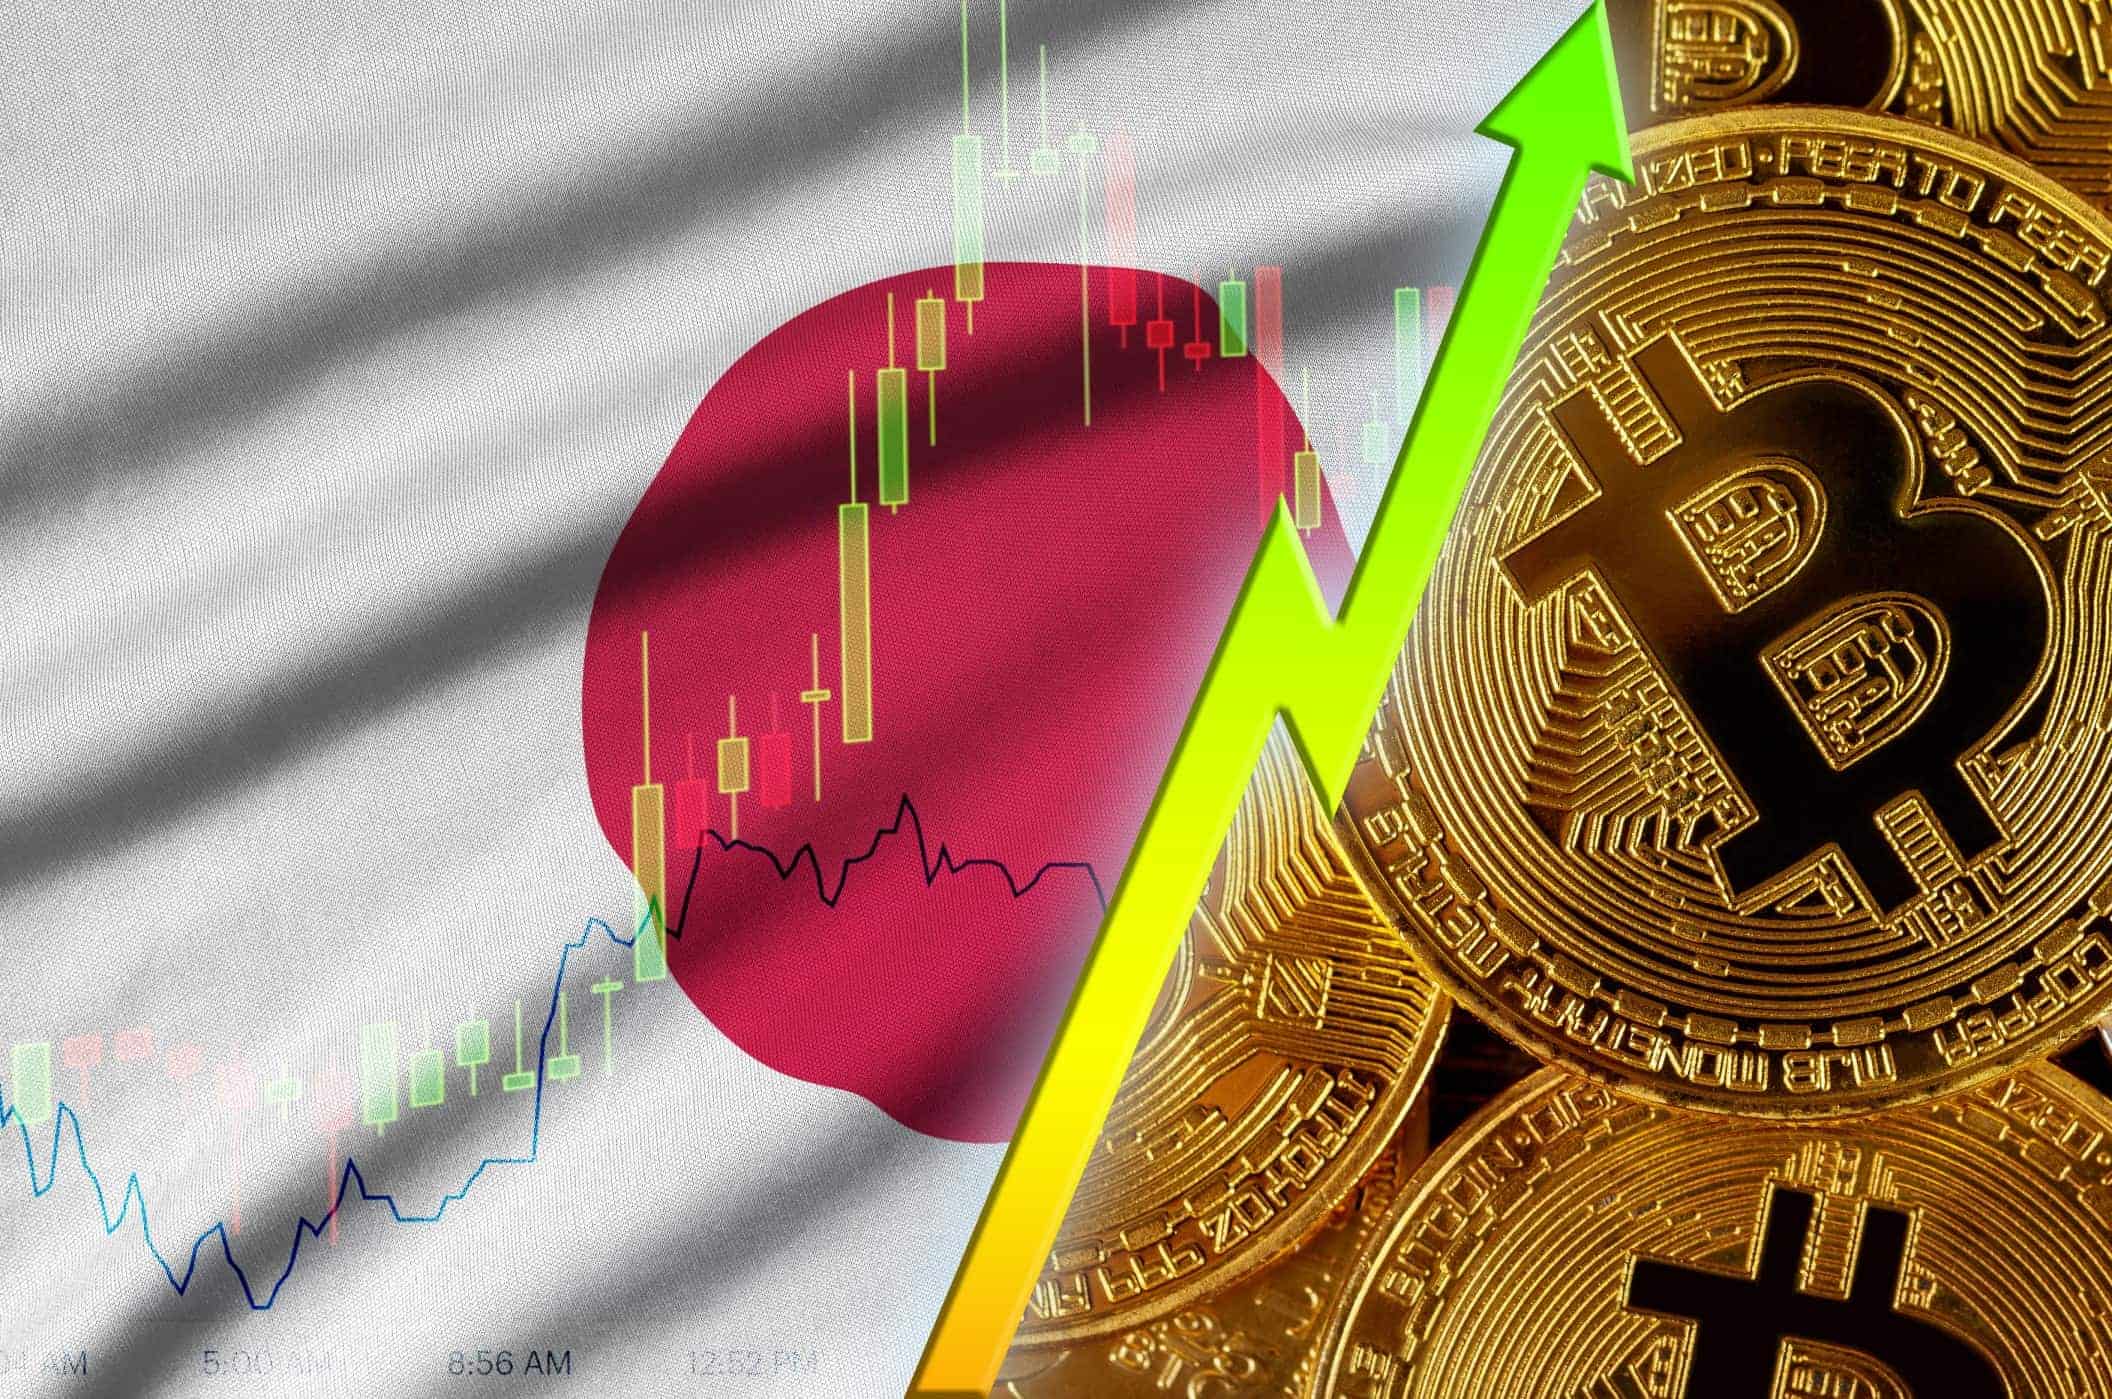 Japan sees record crypto deposits, nearly 7 times more than last year